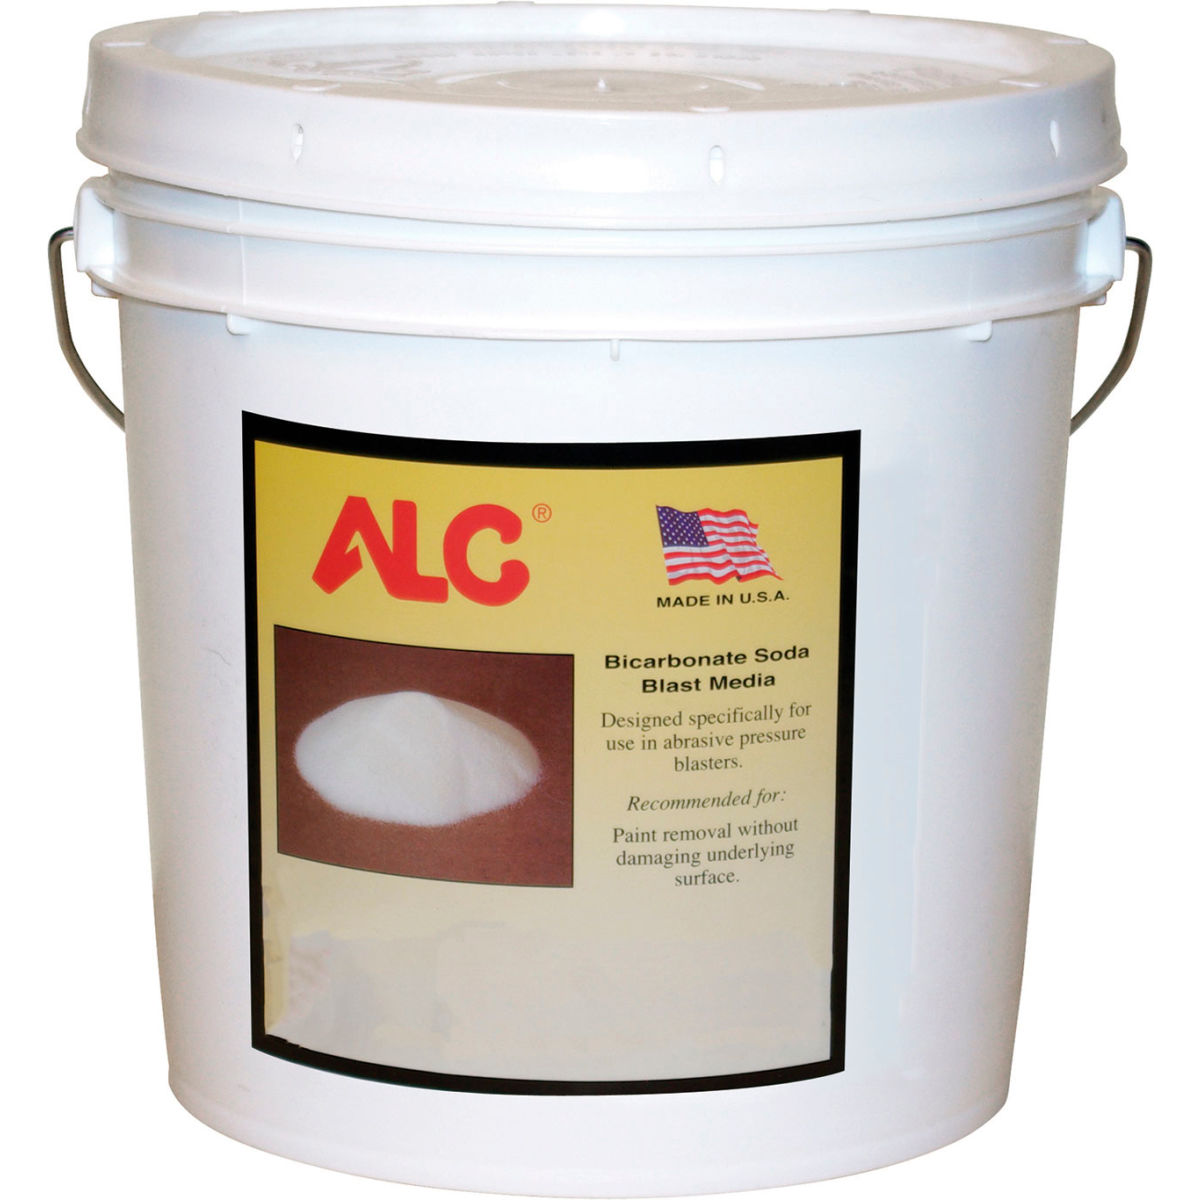 Picture of S & H Industries B2247298 50 lbs ALC 40130 50 Grit Bicarbonate of Soda